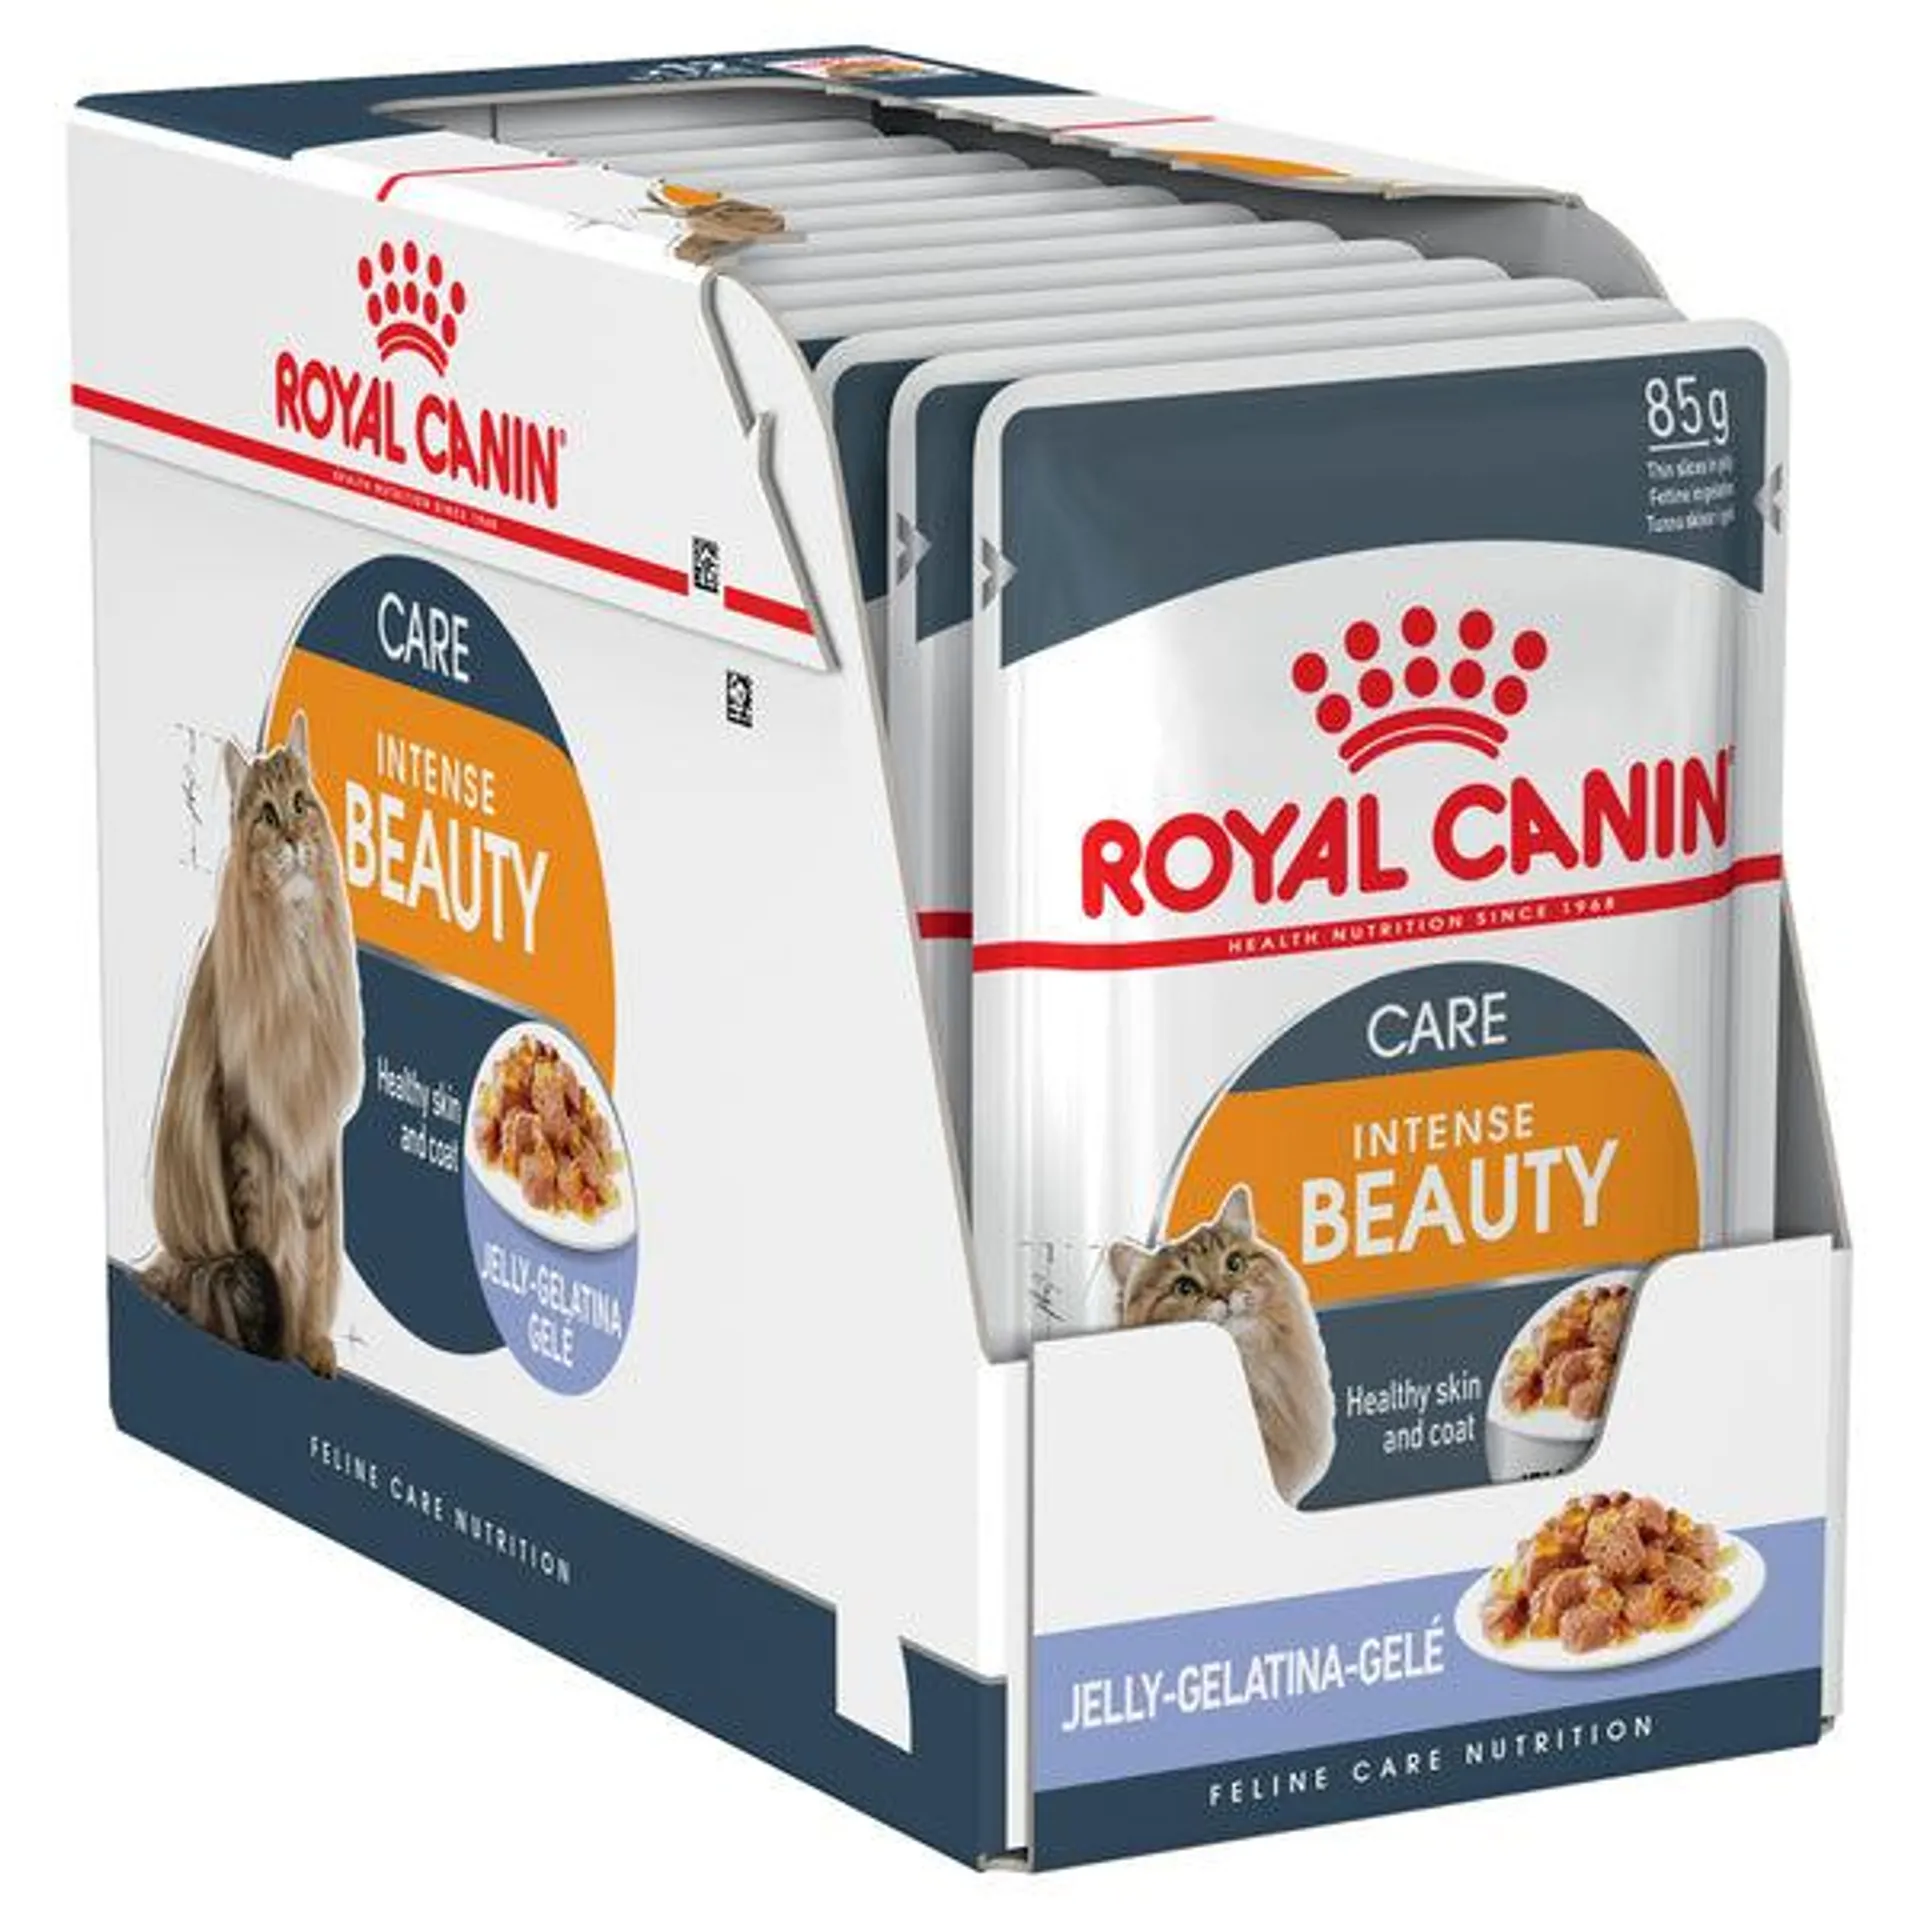 Royal Canin - Hair & Skin Care Care Jelly Adult Cat Wet Food (85g x 12pk)